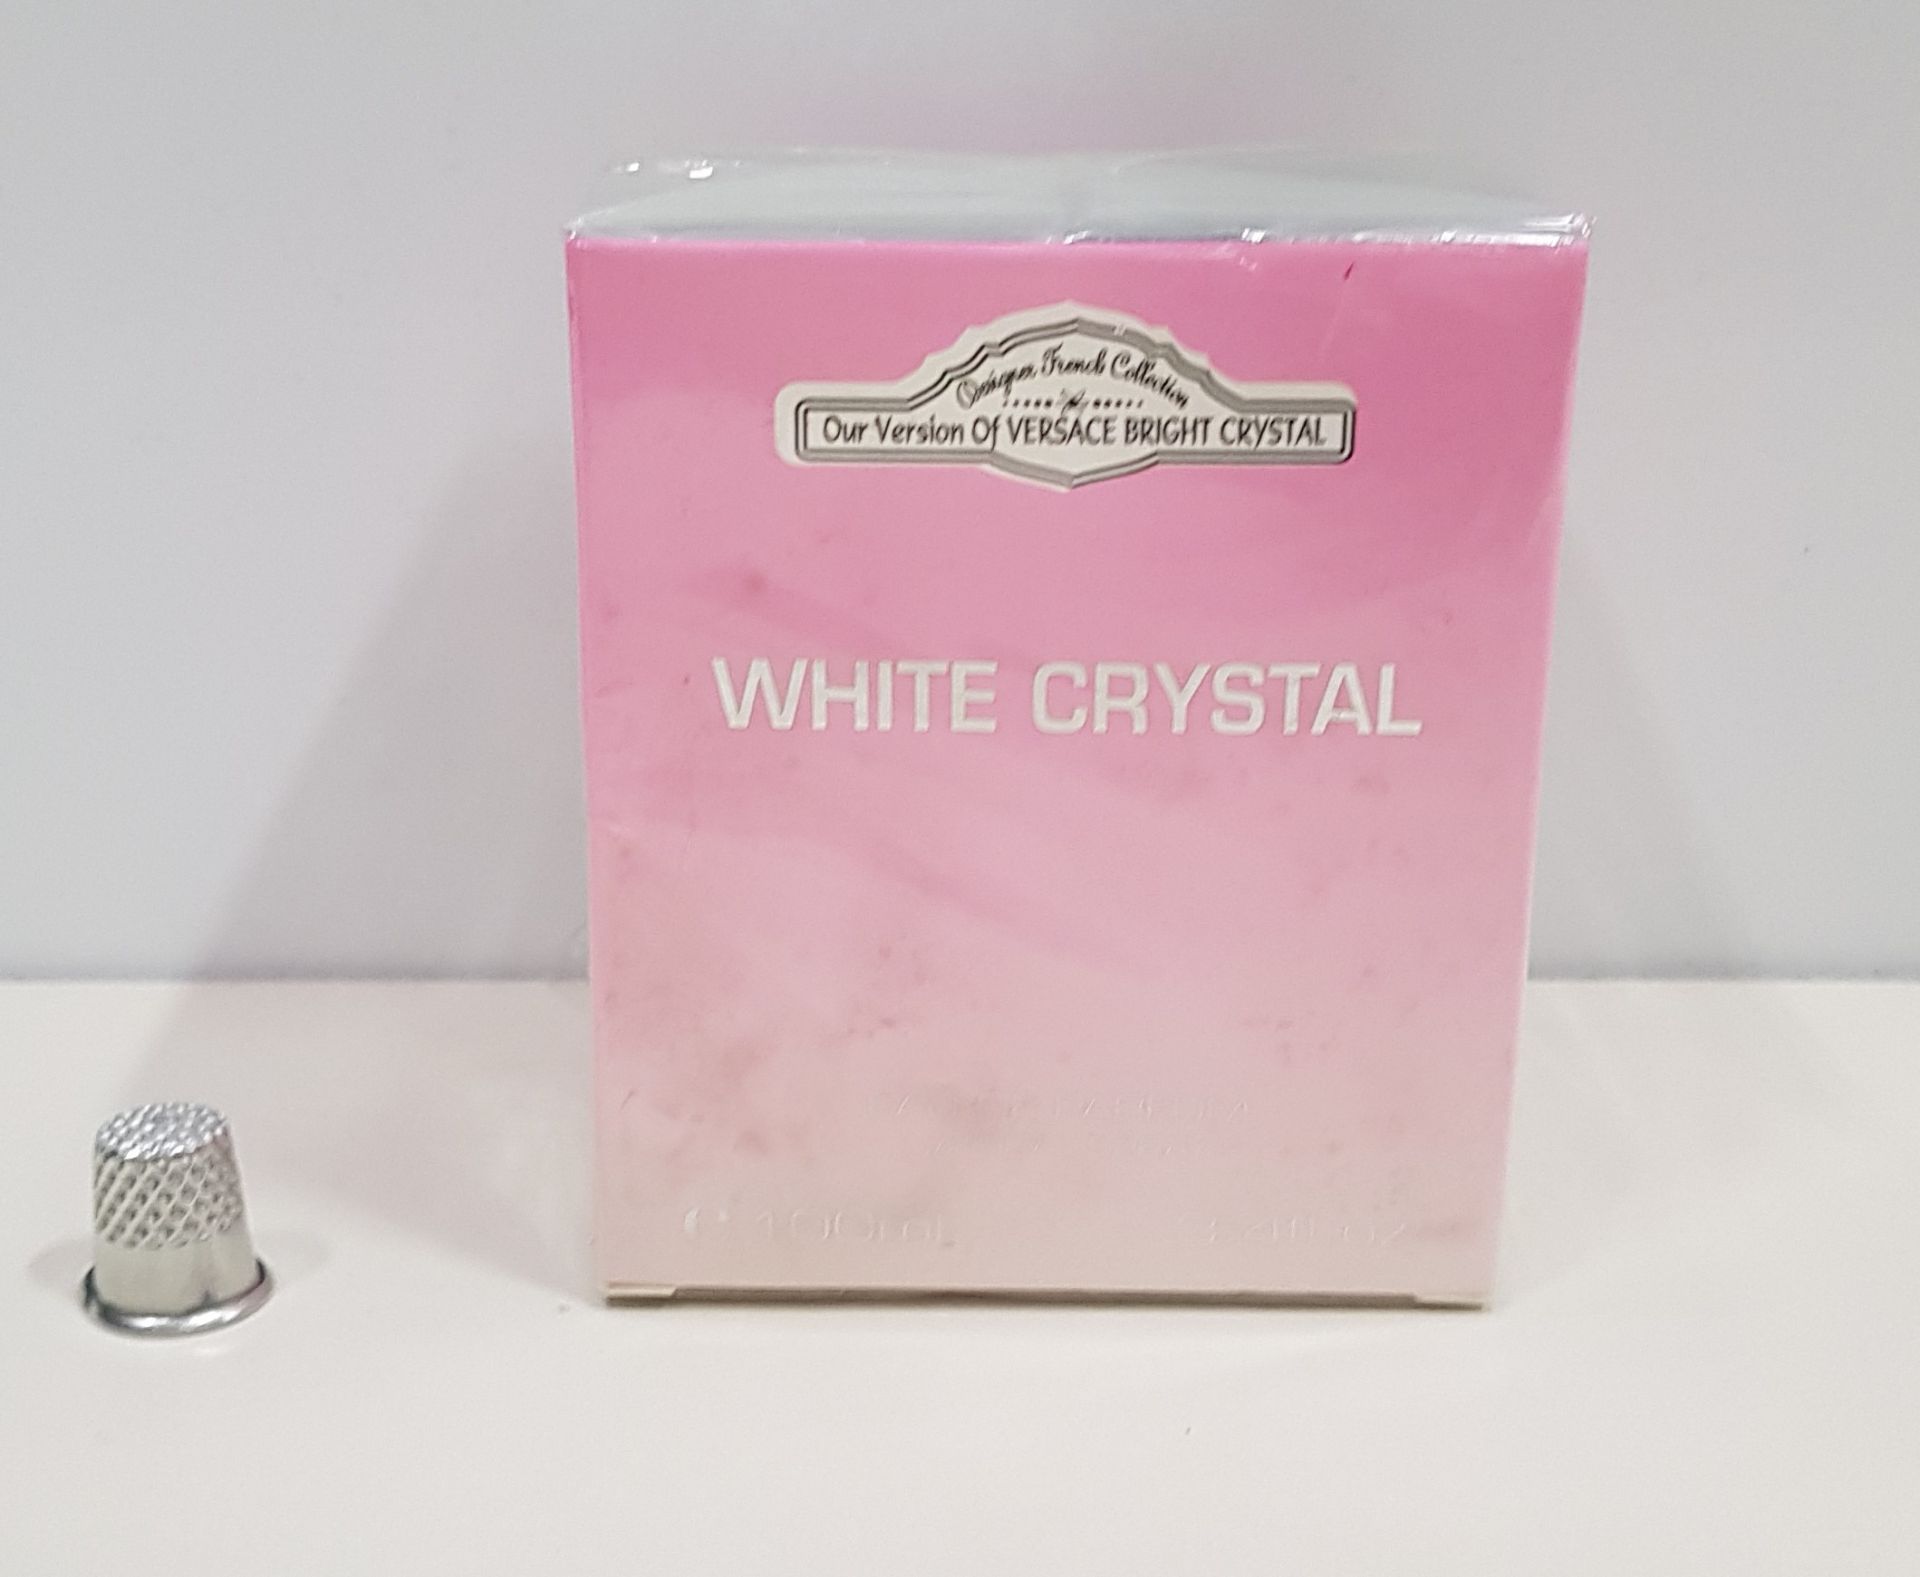 41 X BRAND NEW DESIGNER FRENCH COLLECTION WHITE CRYSTAL EAU DE PERFUM 100ML 3.4FL.OZ. (IN ONE PART